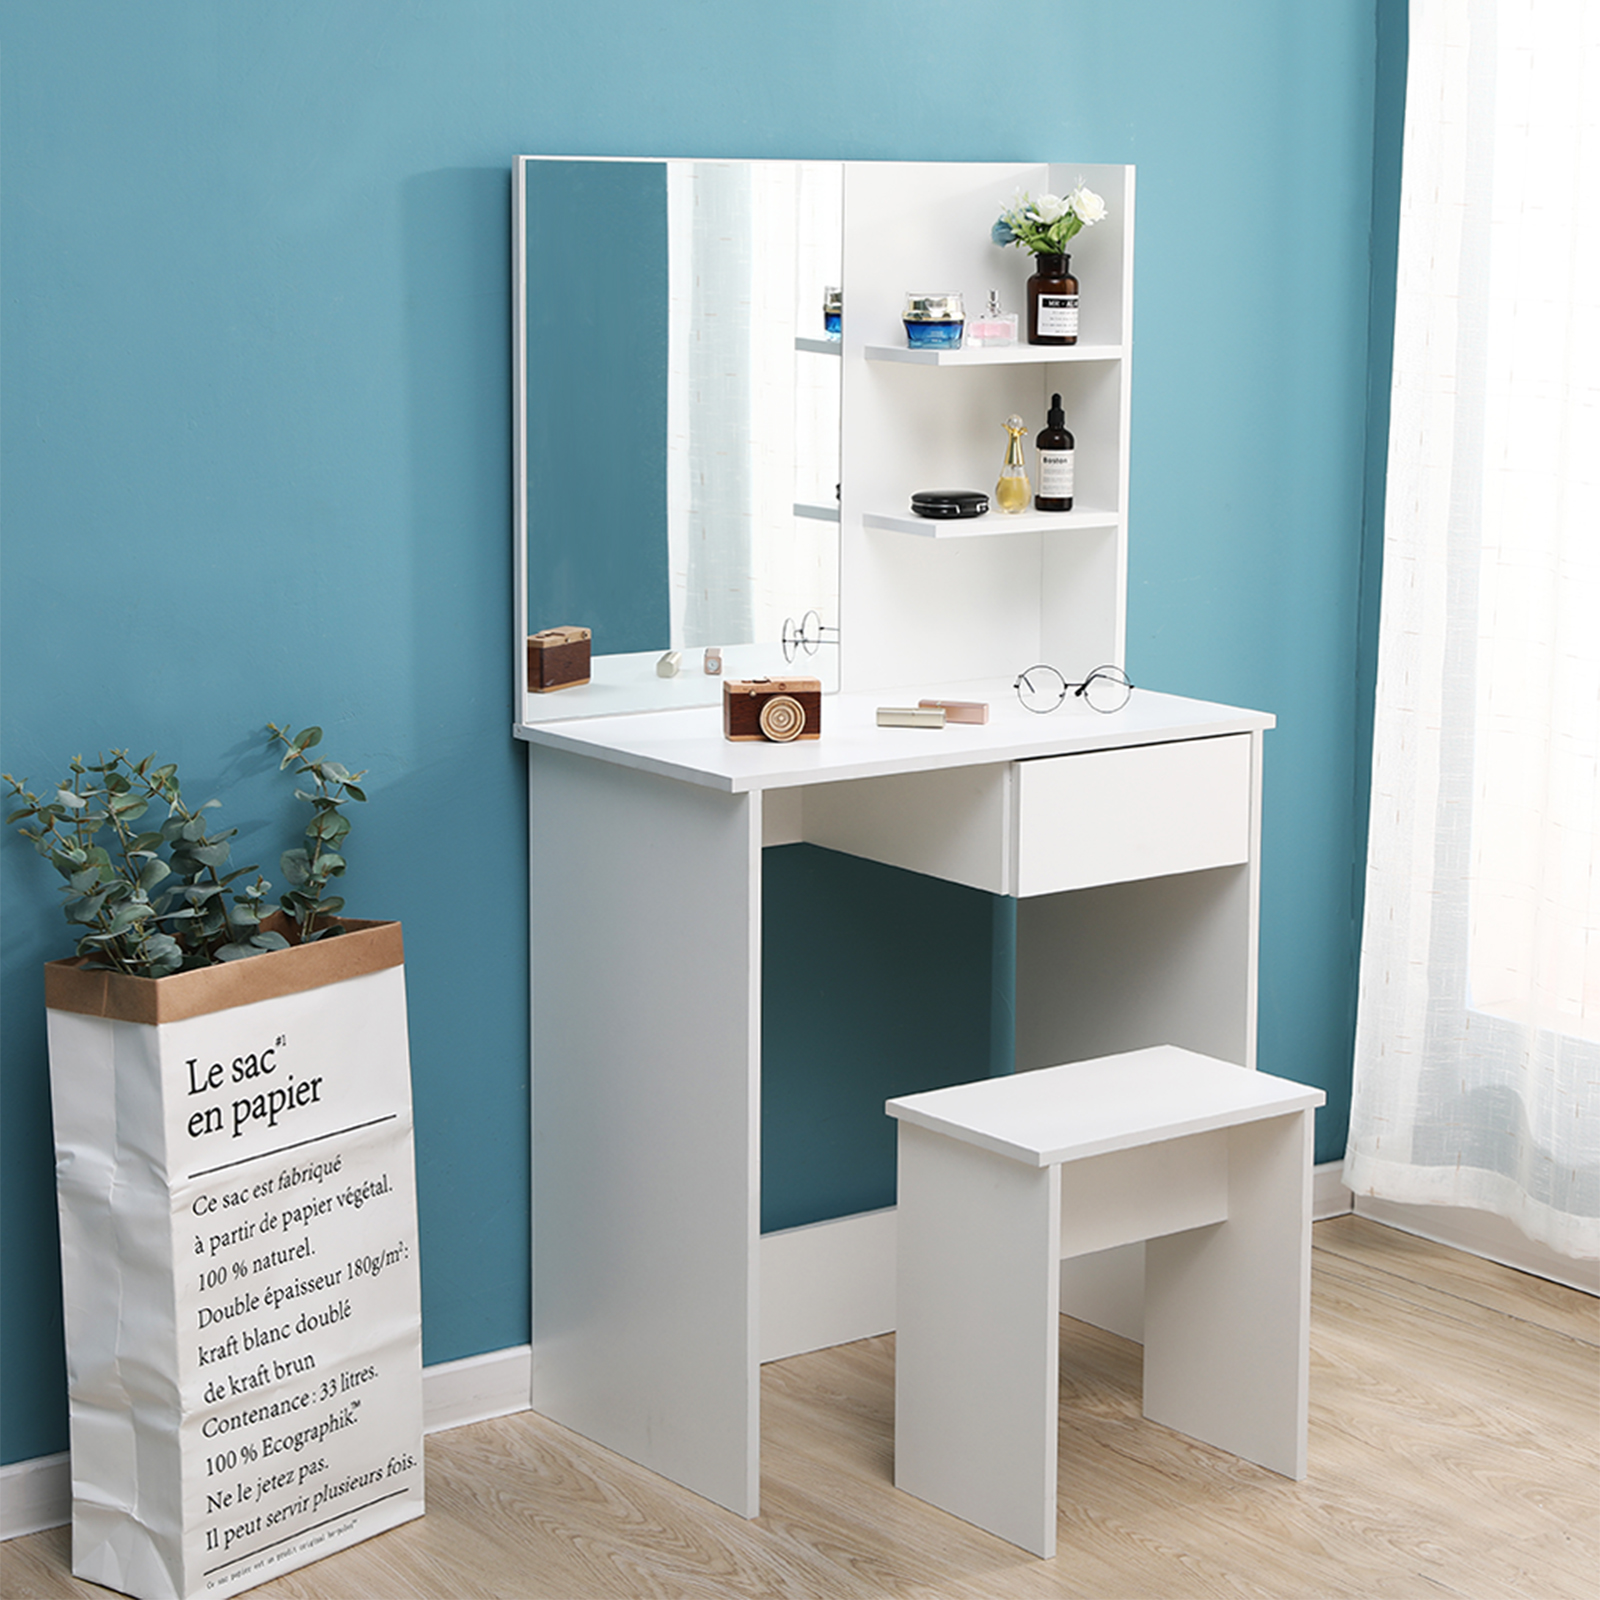 Details About Modern Corner Dressing Table Stool Bedroom Makeup Desk W Mirror Drawers White